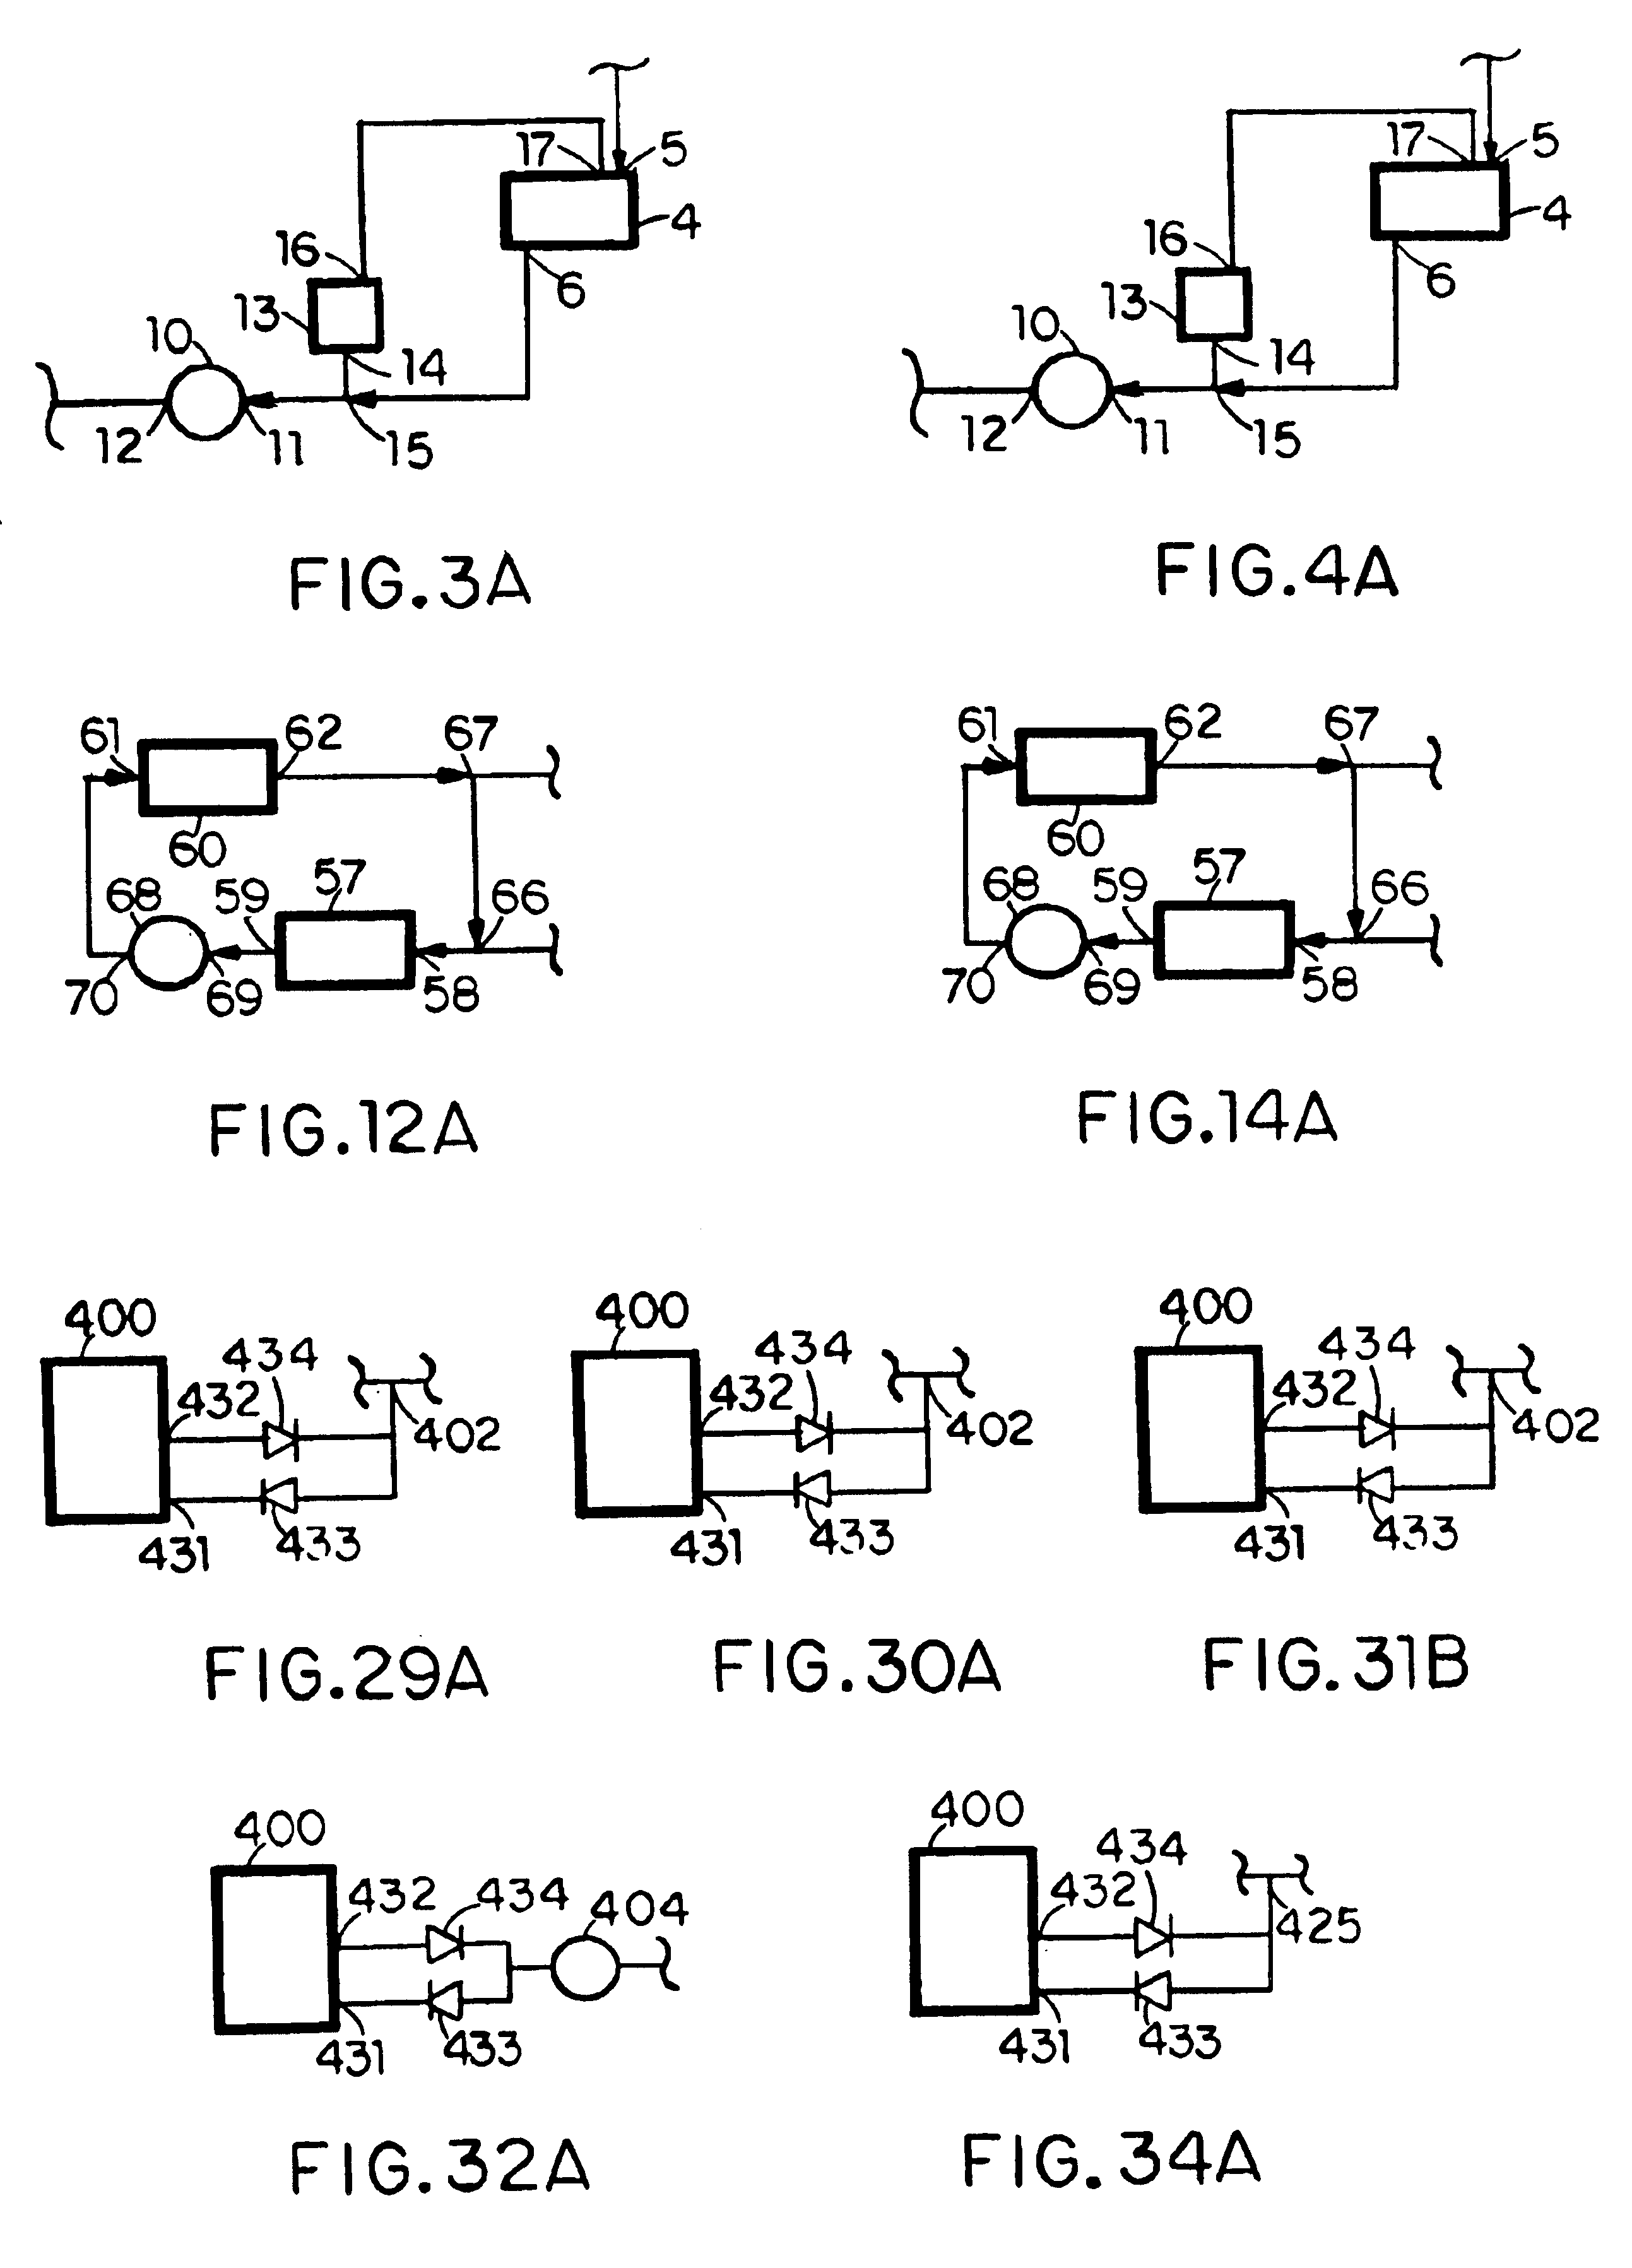 Two-phase heat-transfer systems